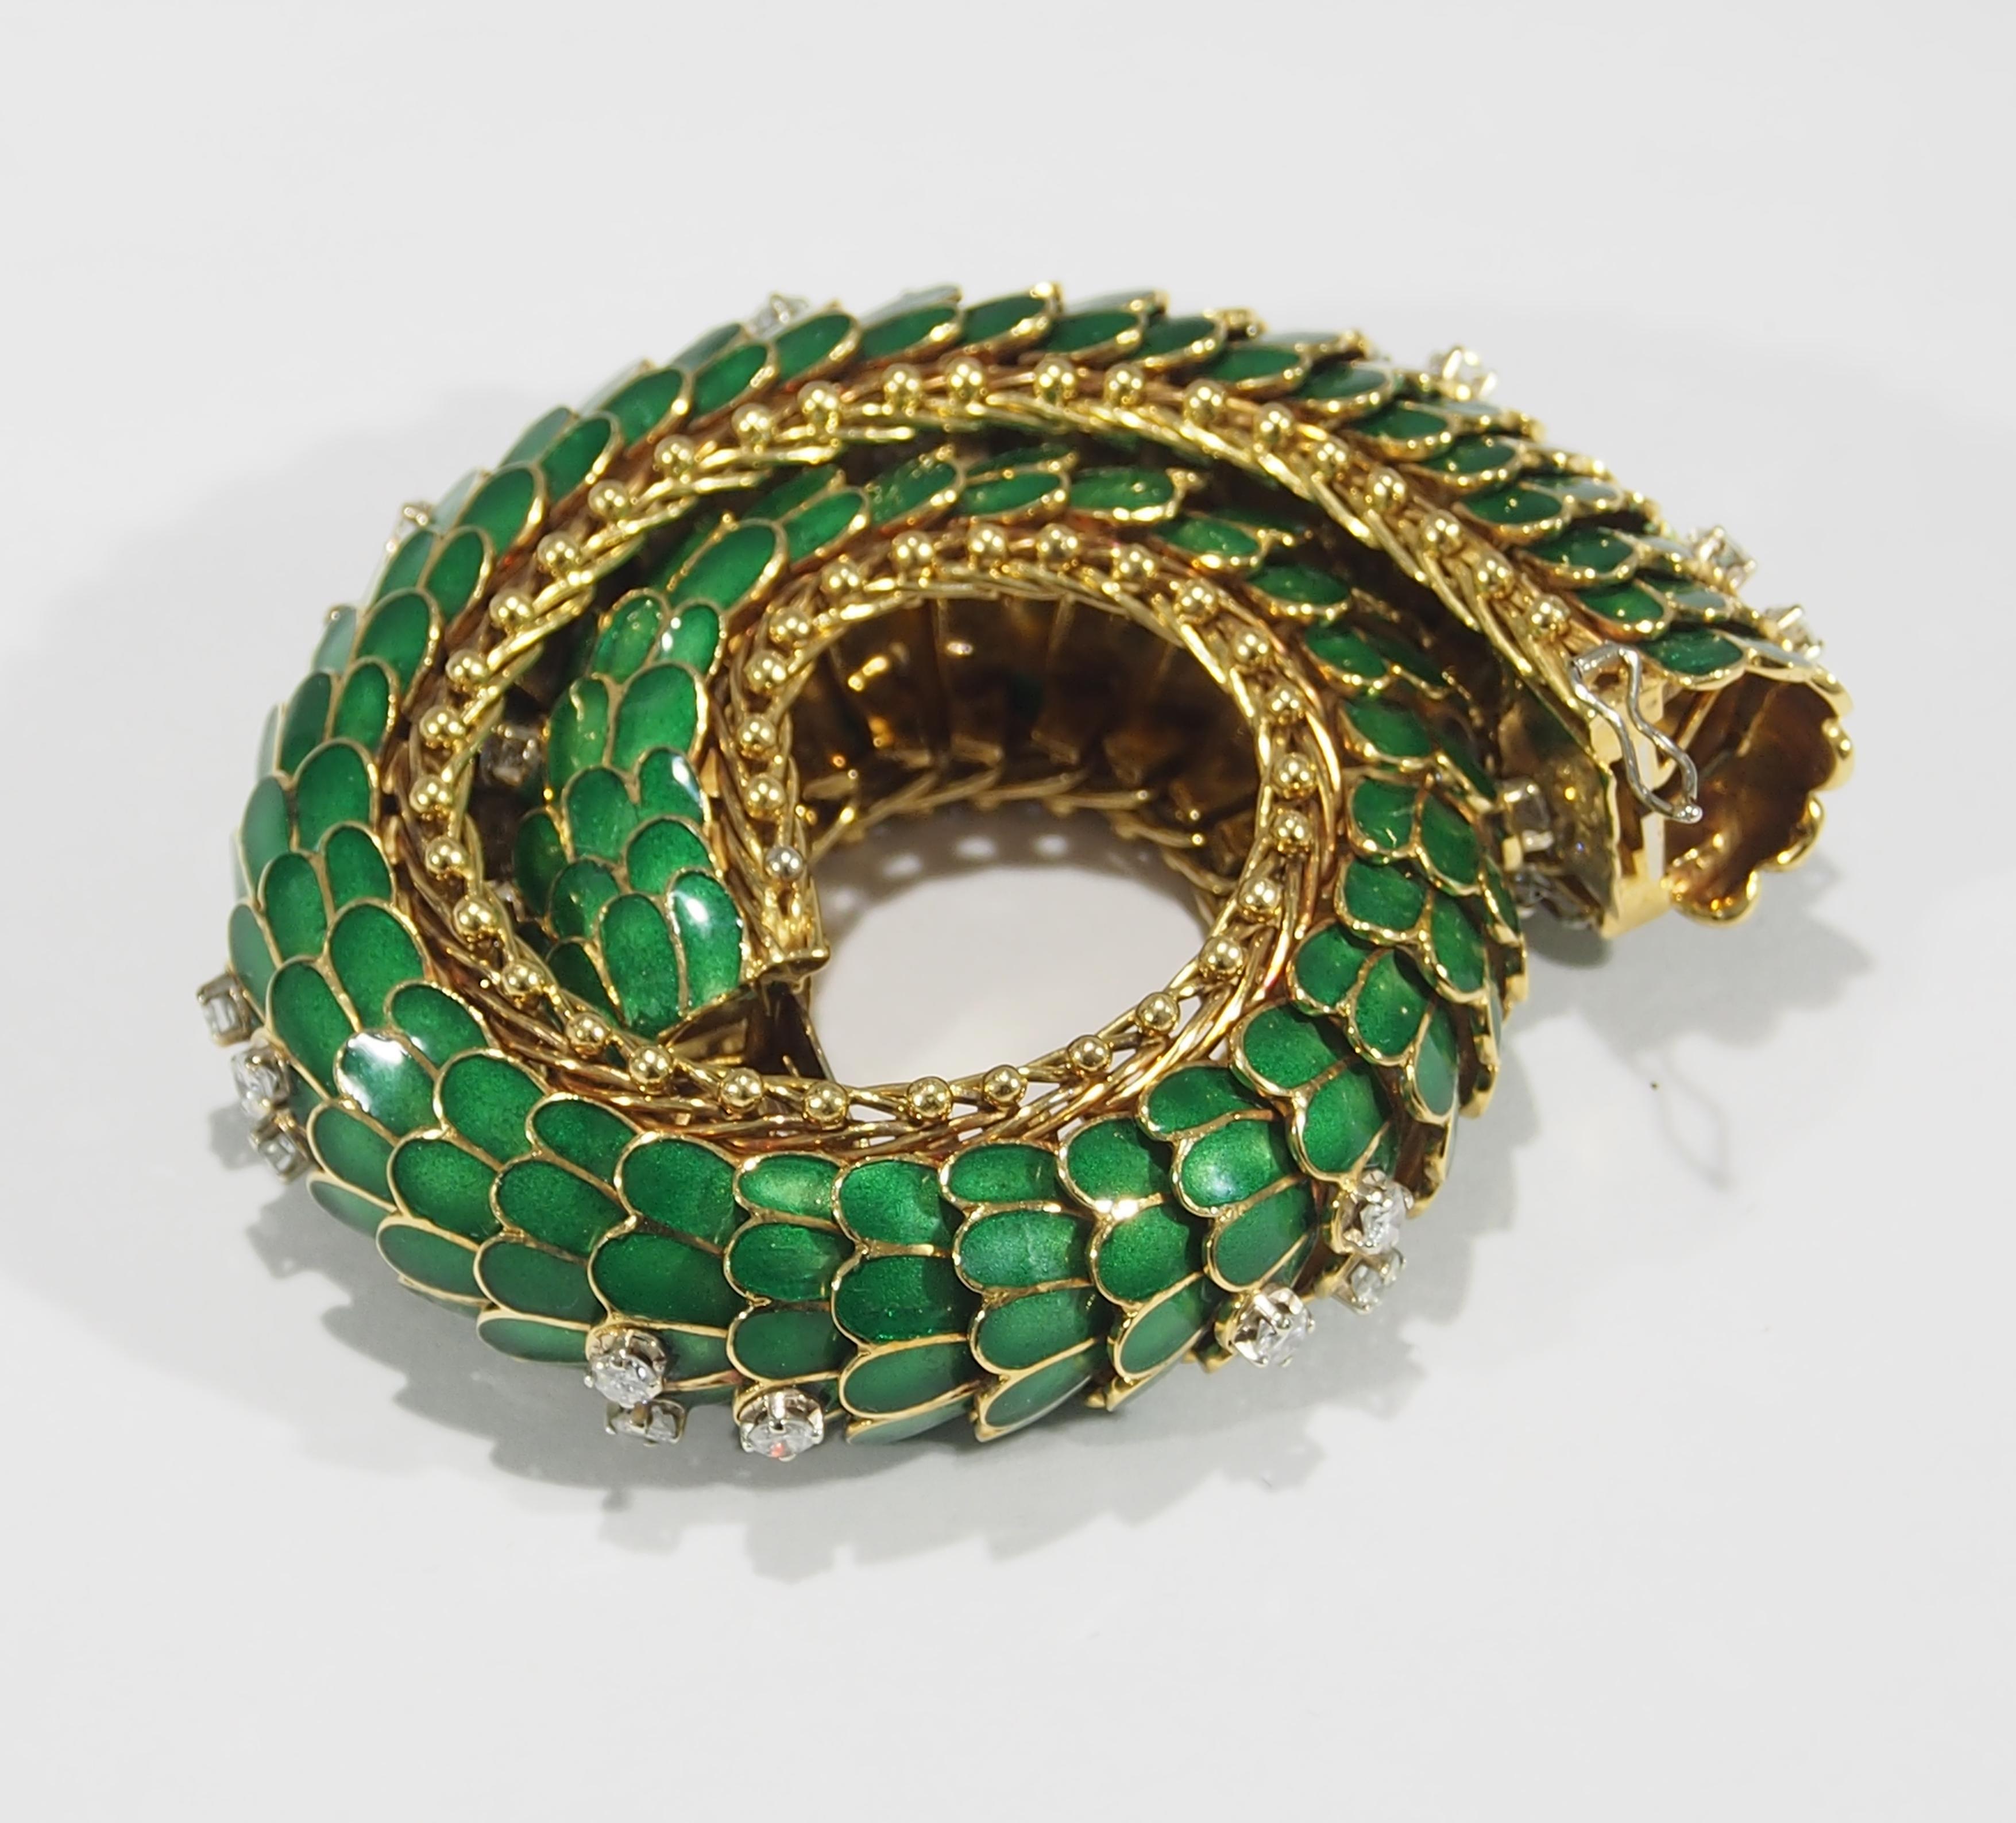 Impressive diamond and enamel 8 inches of reptilian-inspired fine jewelry. Intense green enamel scales gently lift and move as you don this lovely bracelet. Resembling a dragon's tail or serpent, this is a masterfully hand-fabricated piece of truly